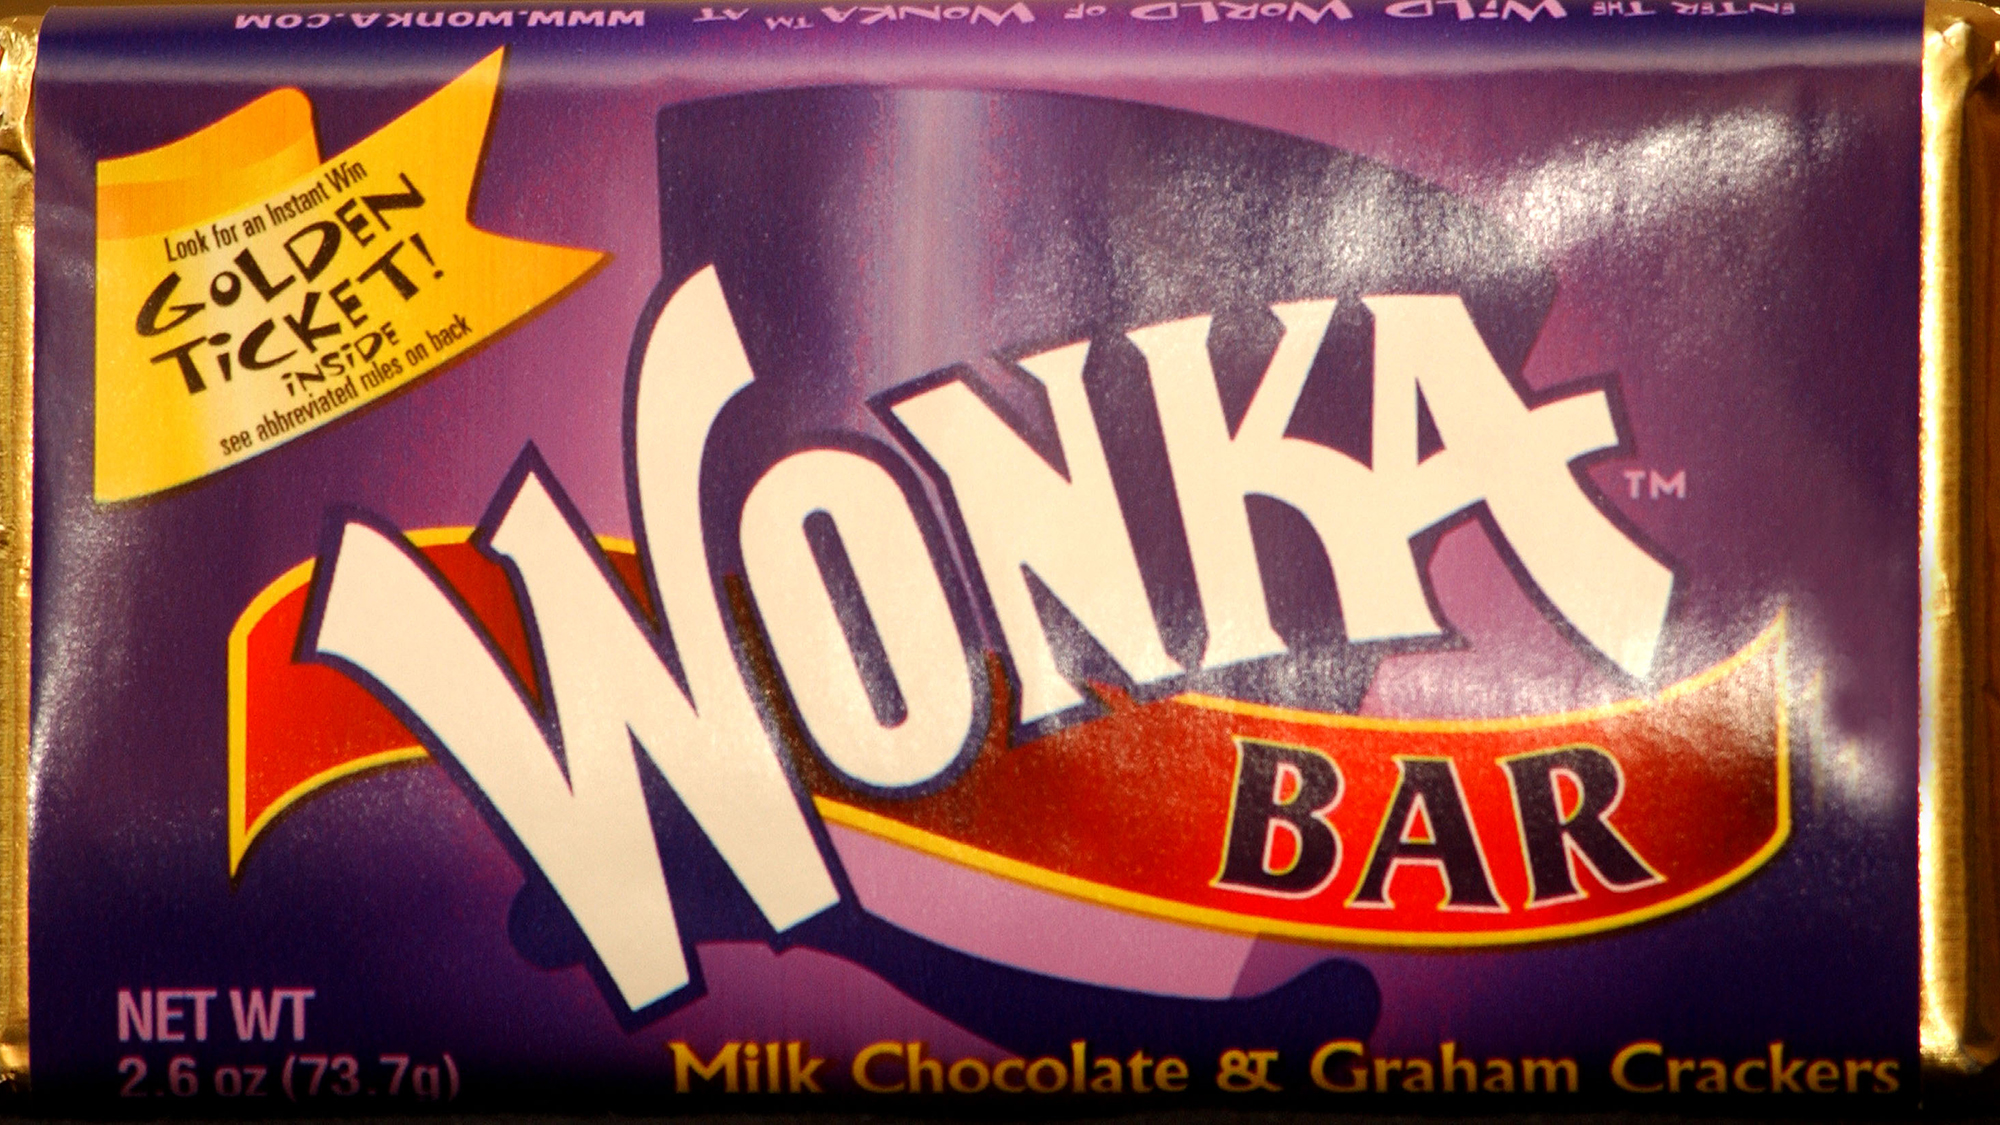 is the name wonka trademarked